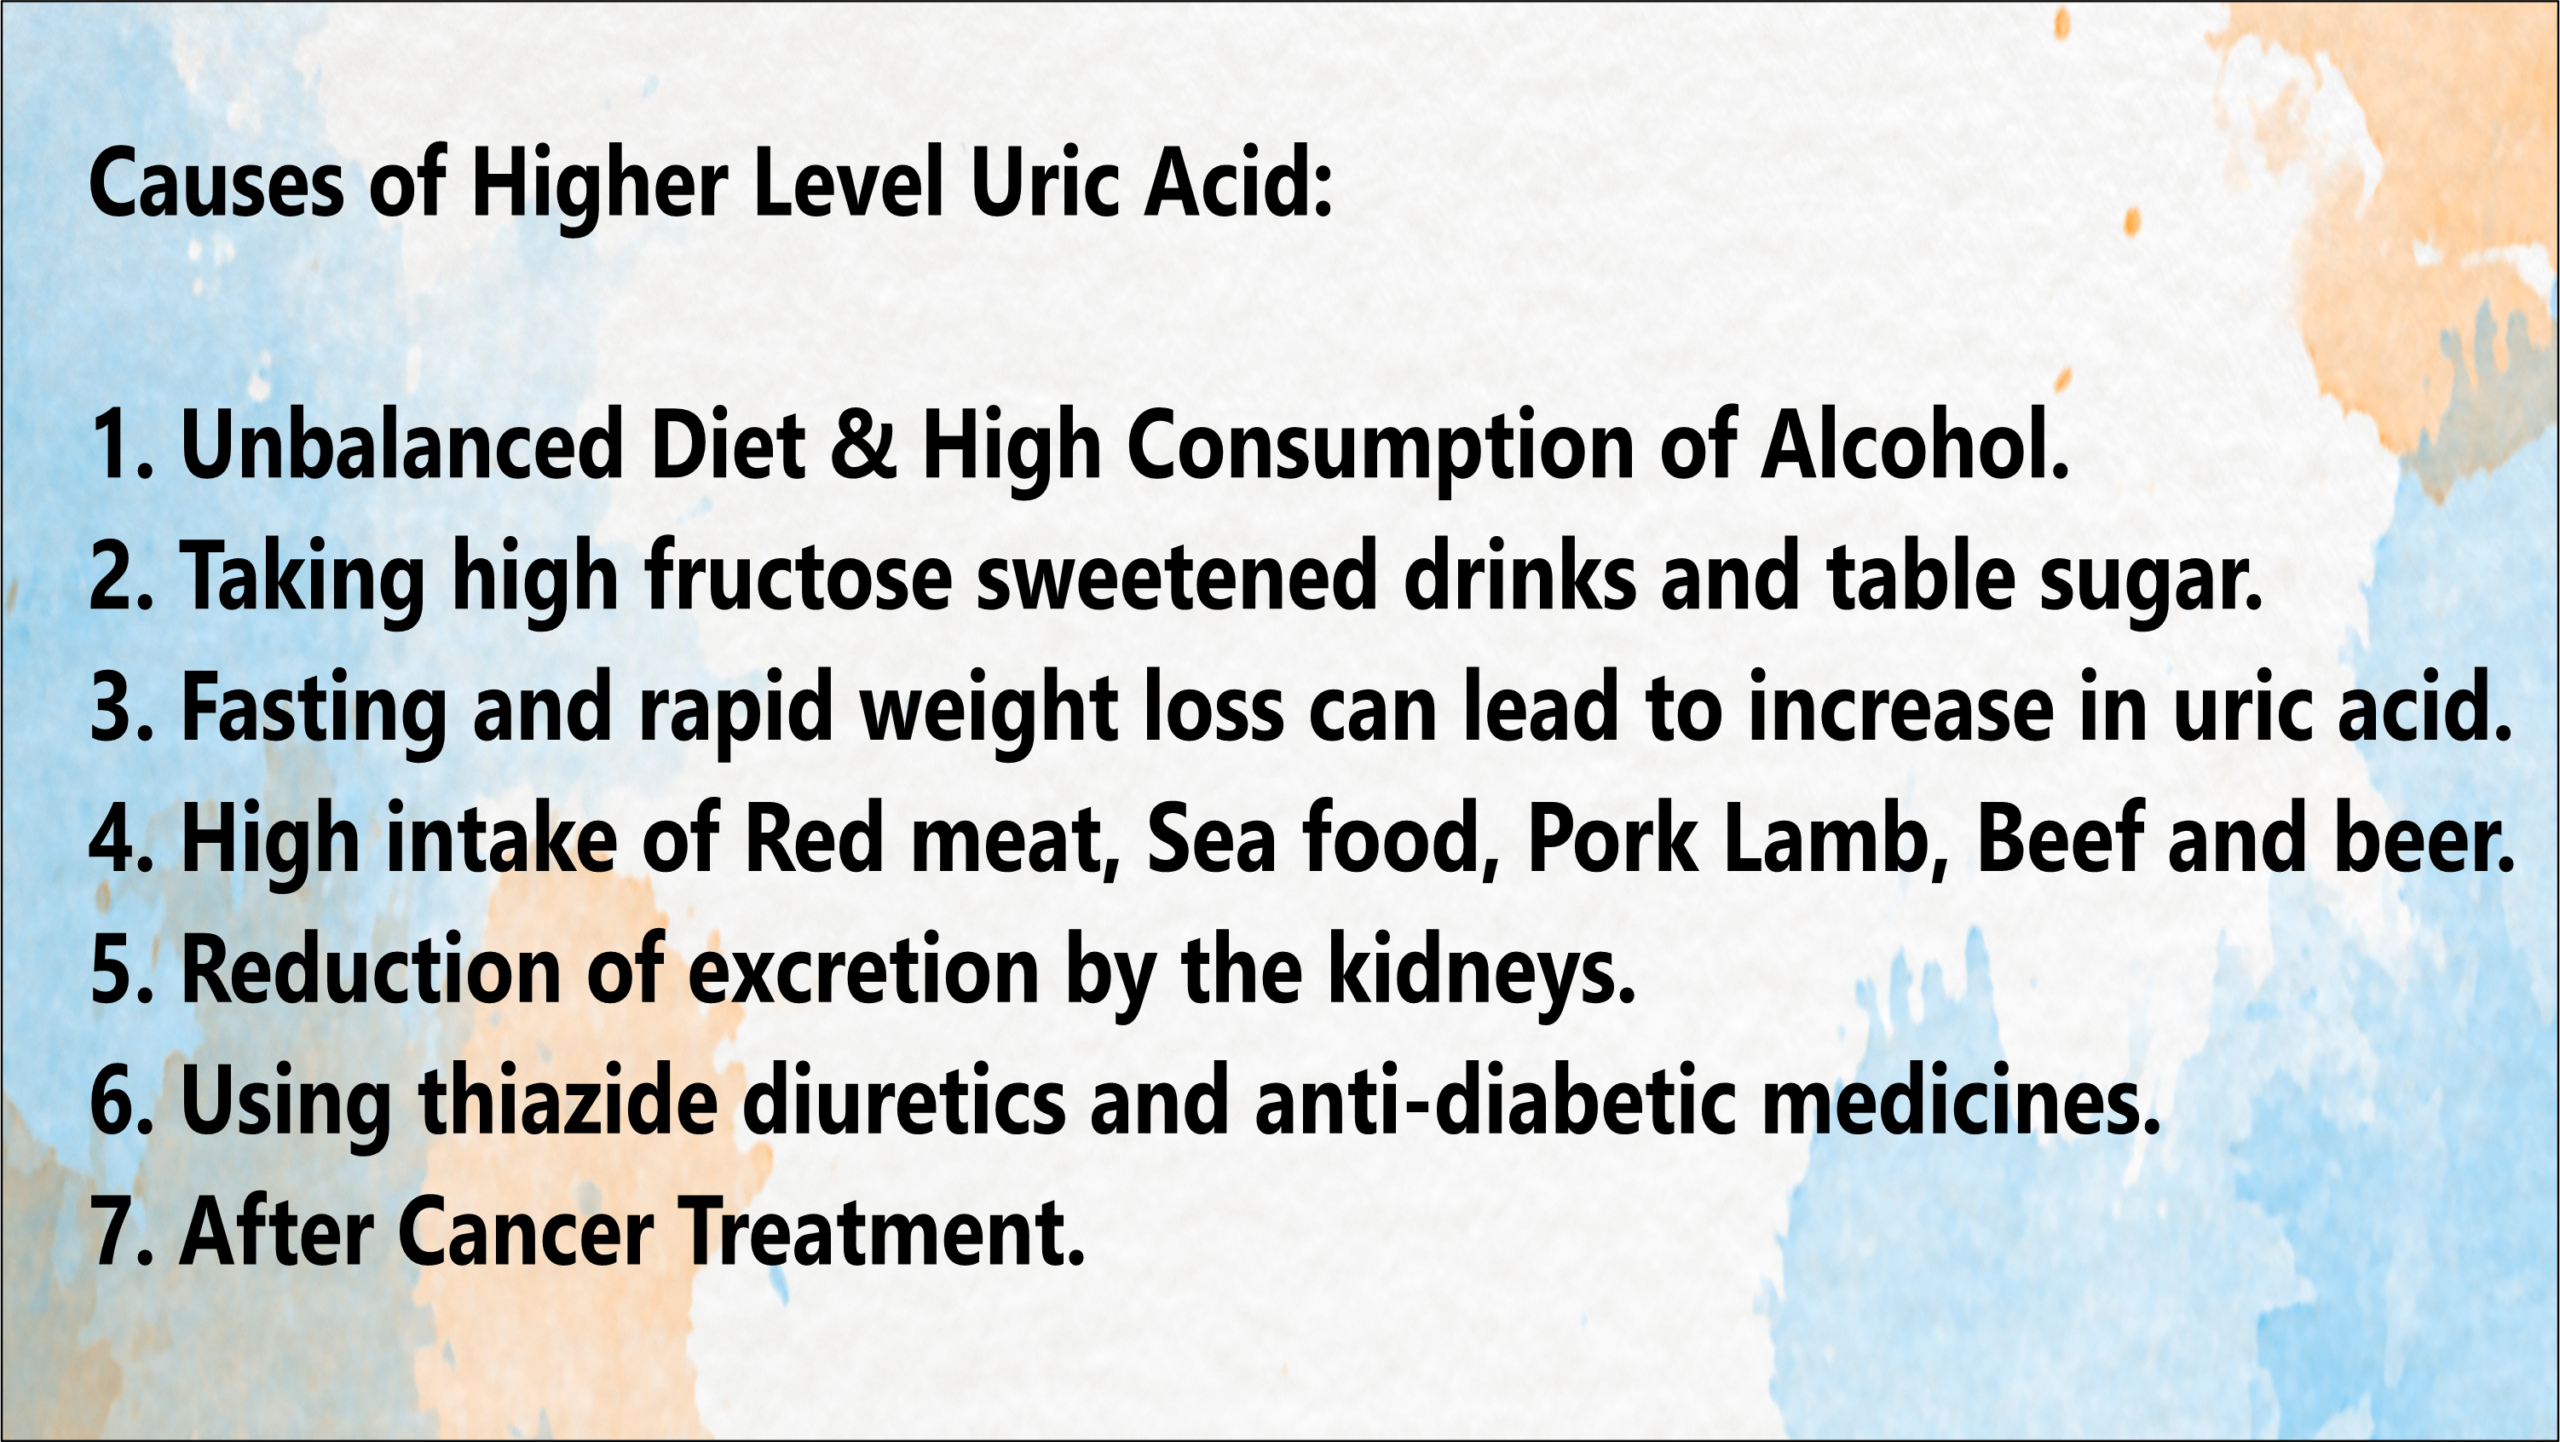 what are the causes of higher level uric acid